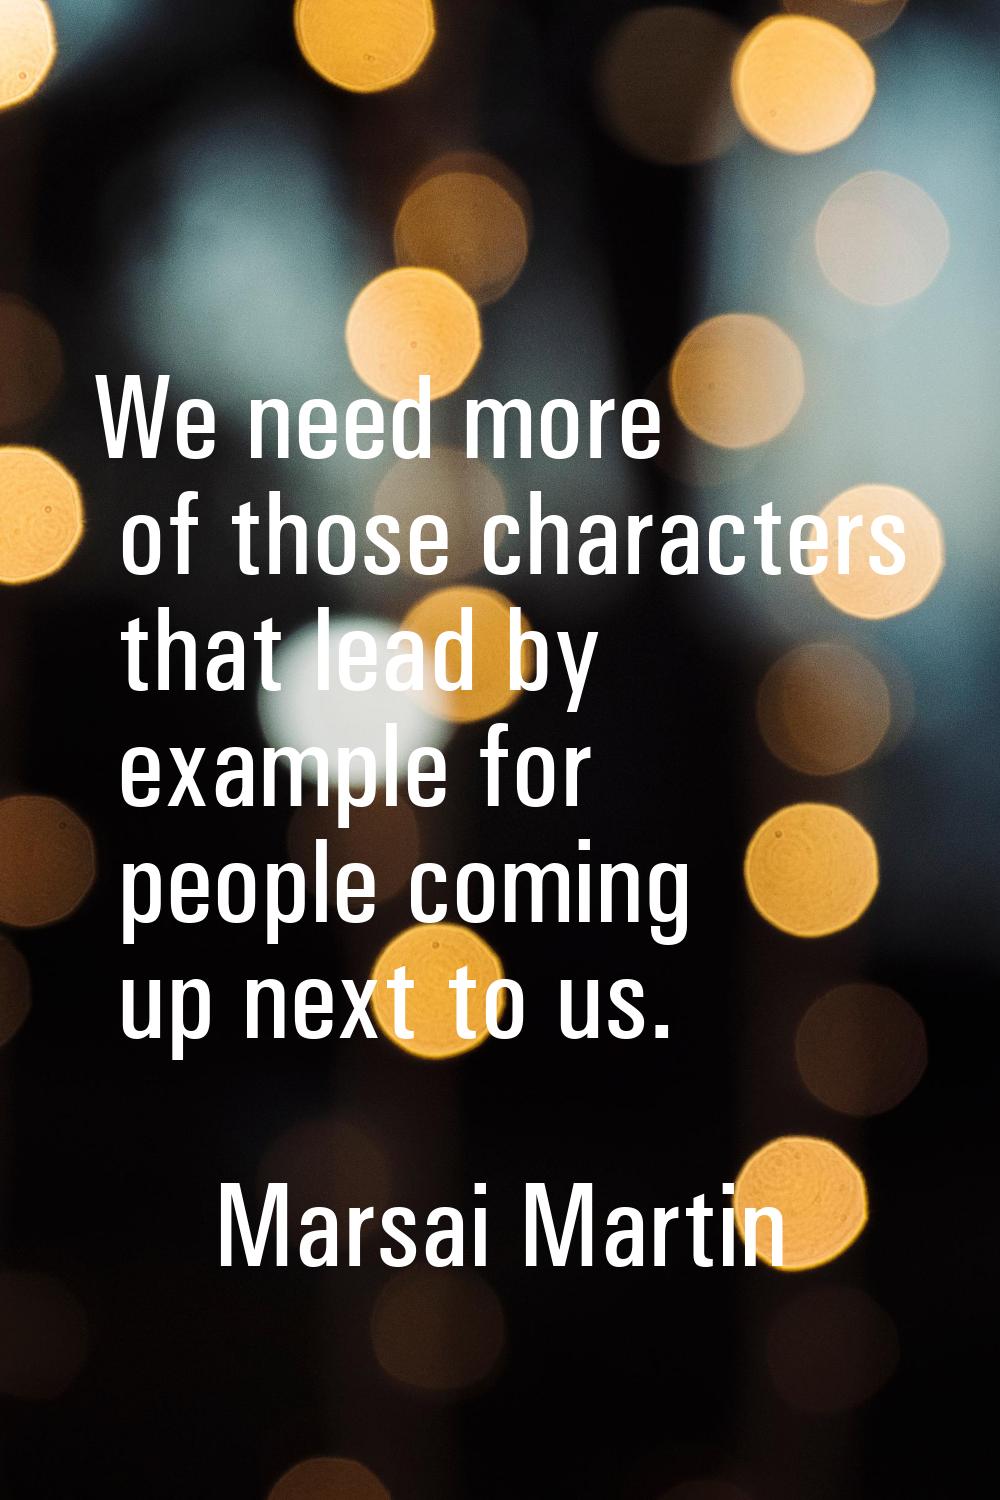 We need more of those characters that lead by example for people coming up next to us.